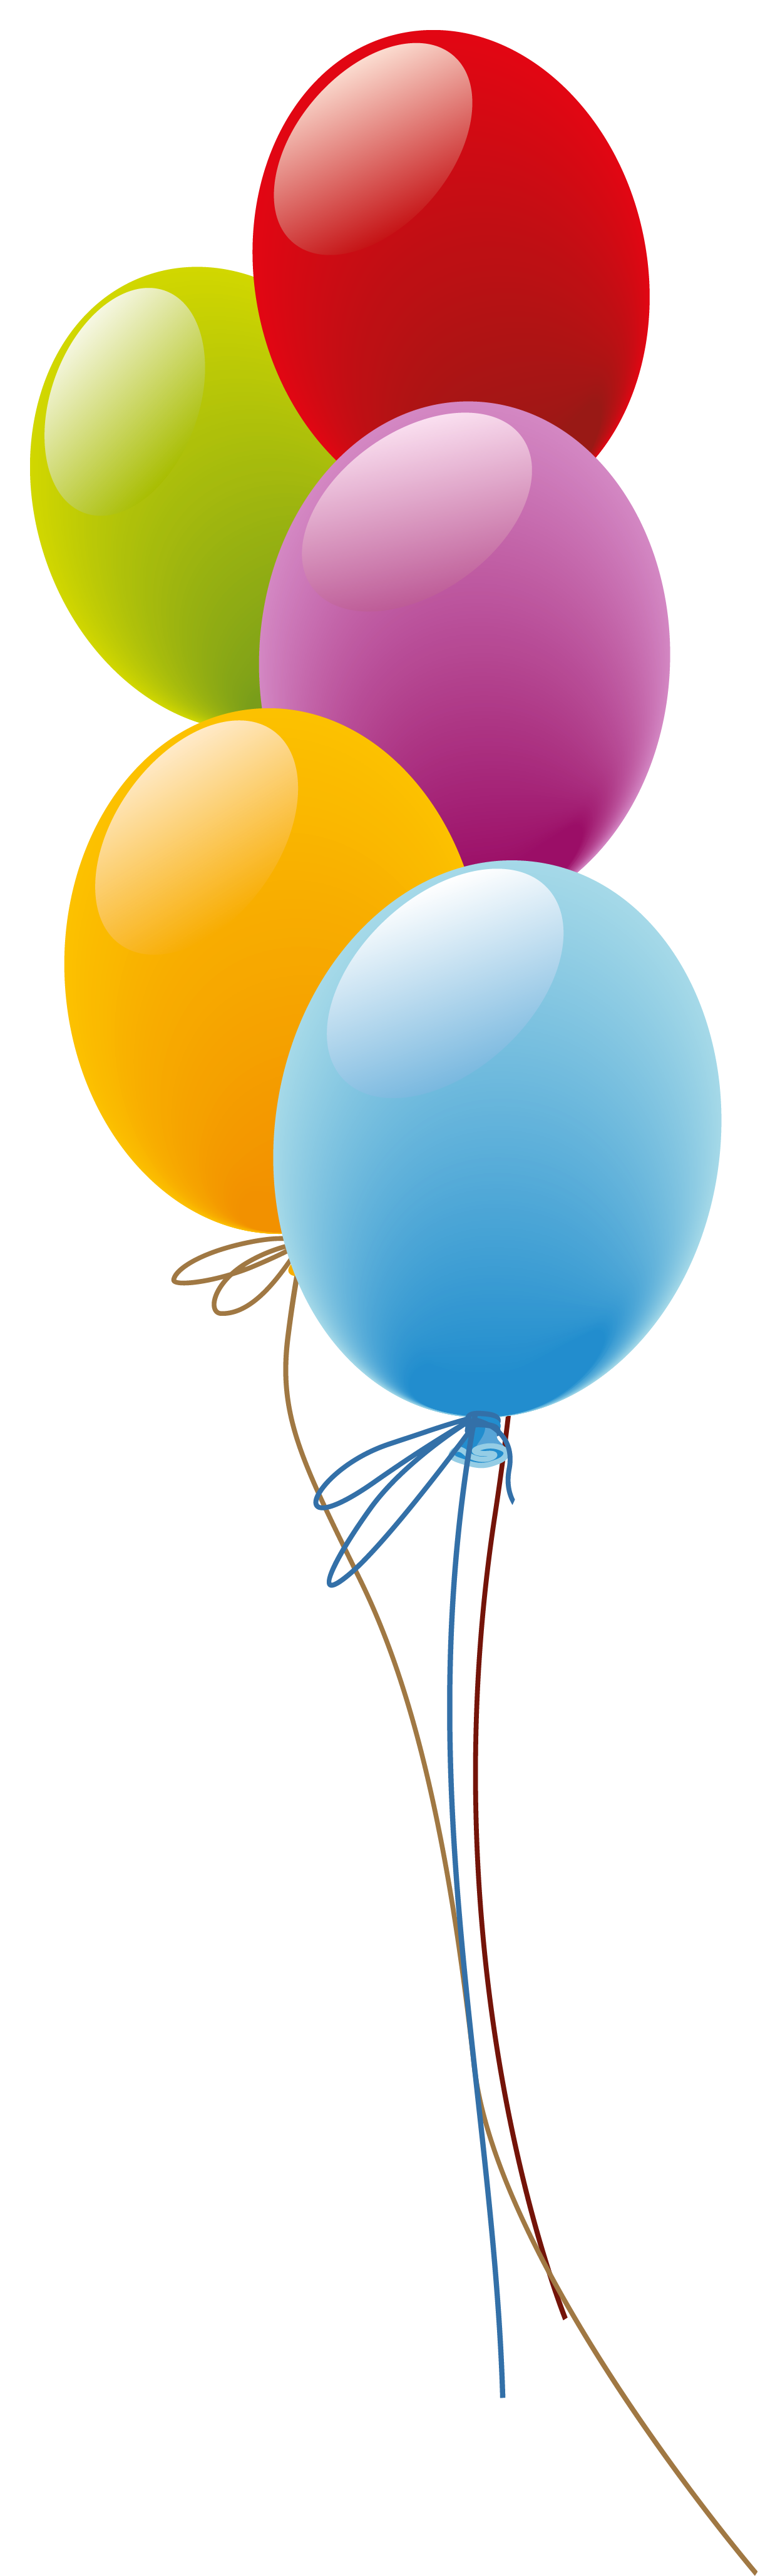 Party Balloon Birthday Free Download Image PNG Image